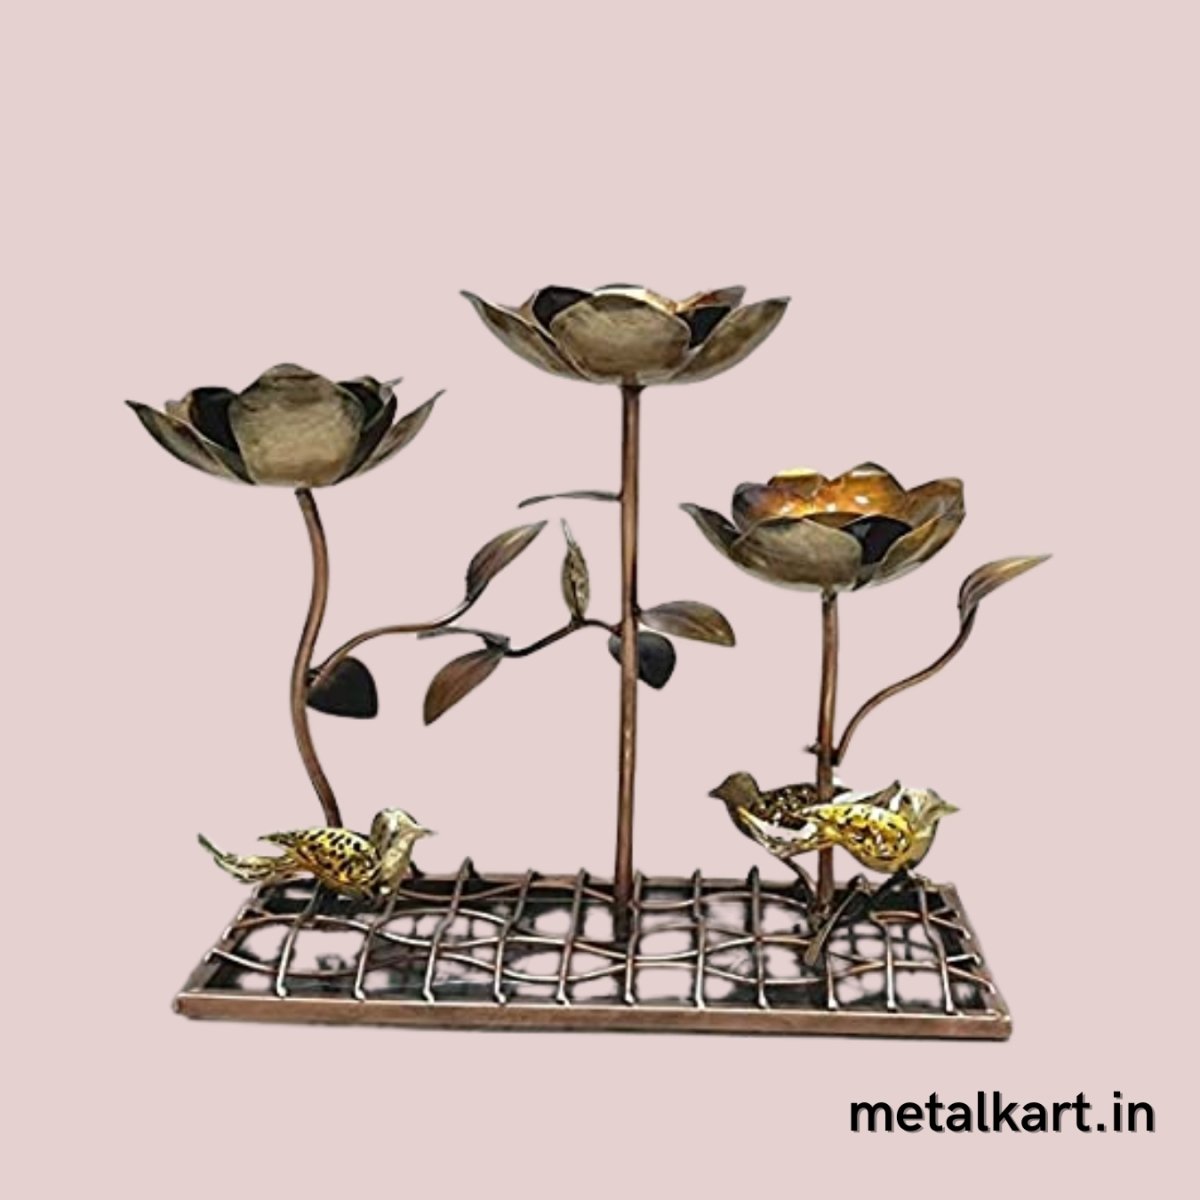 Metallic T-LITE Stand in Lotus Flower with Birds Table décor (22*8*14 Inches)